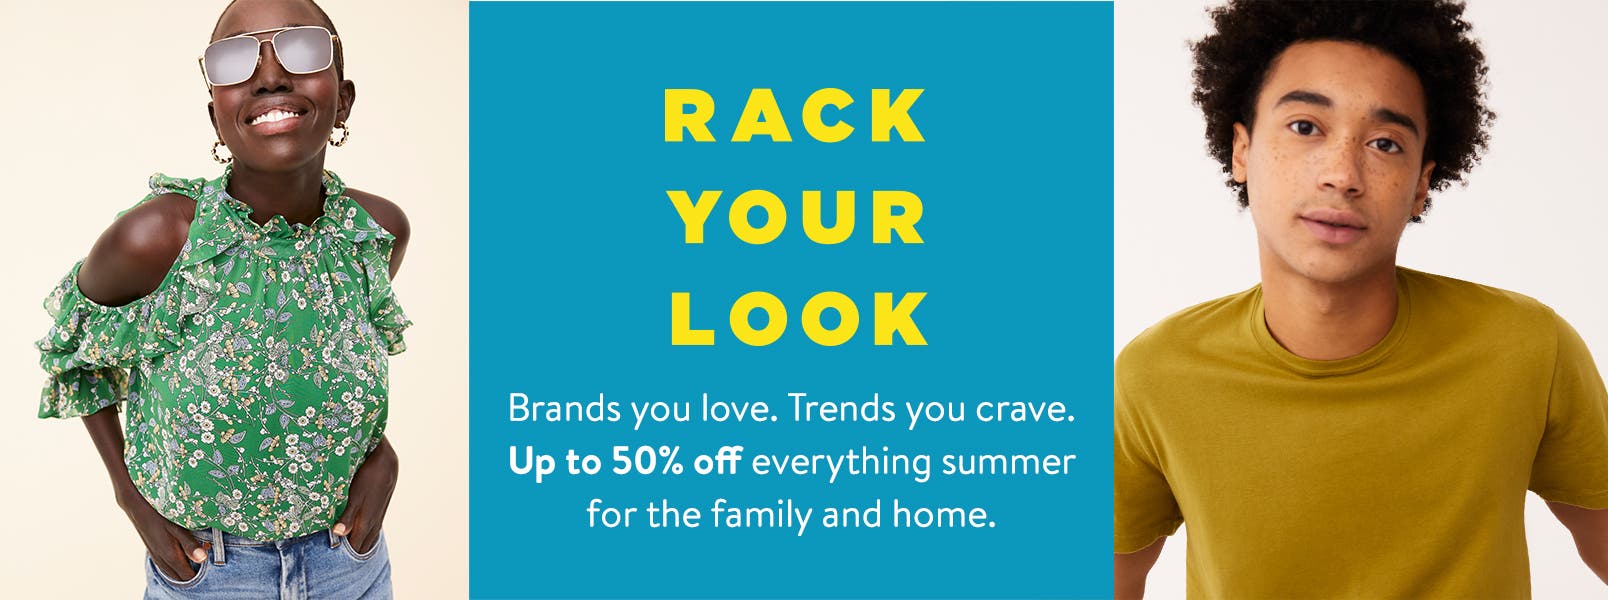 Rack your look. Brands you love. Trends you crave. Up to fifty percent off everything summer for the family and home.